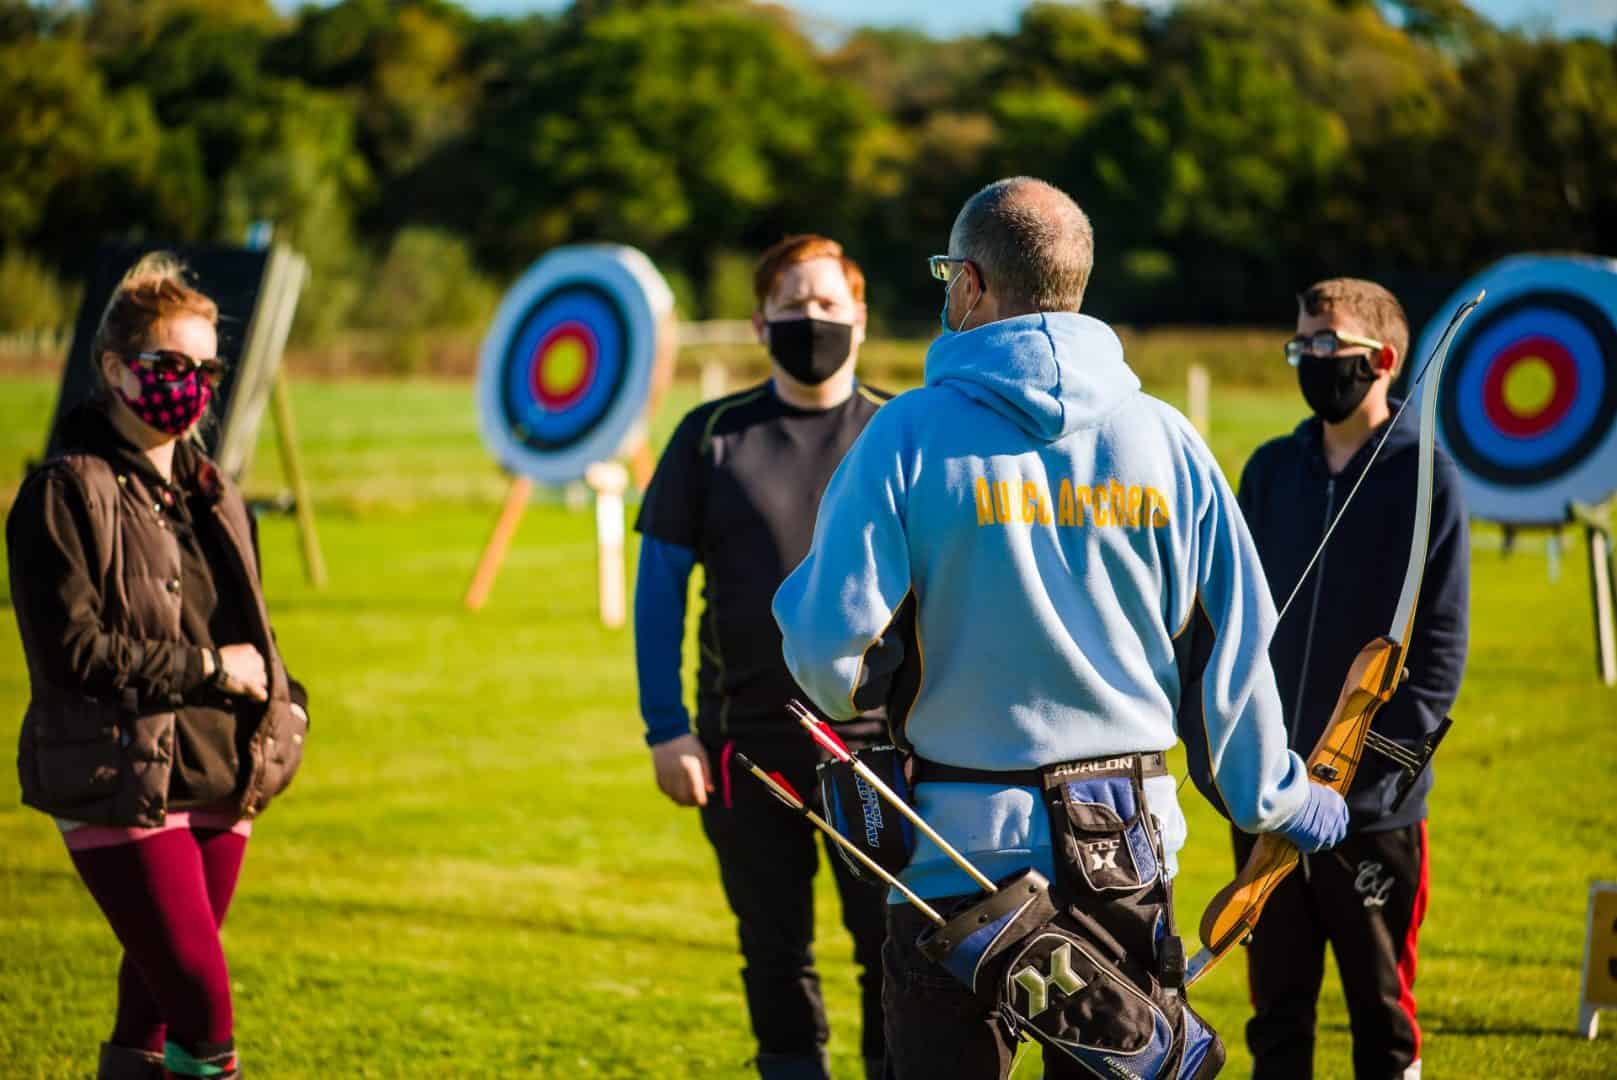 Thank you to our incredible archery volunteers